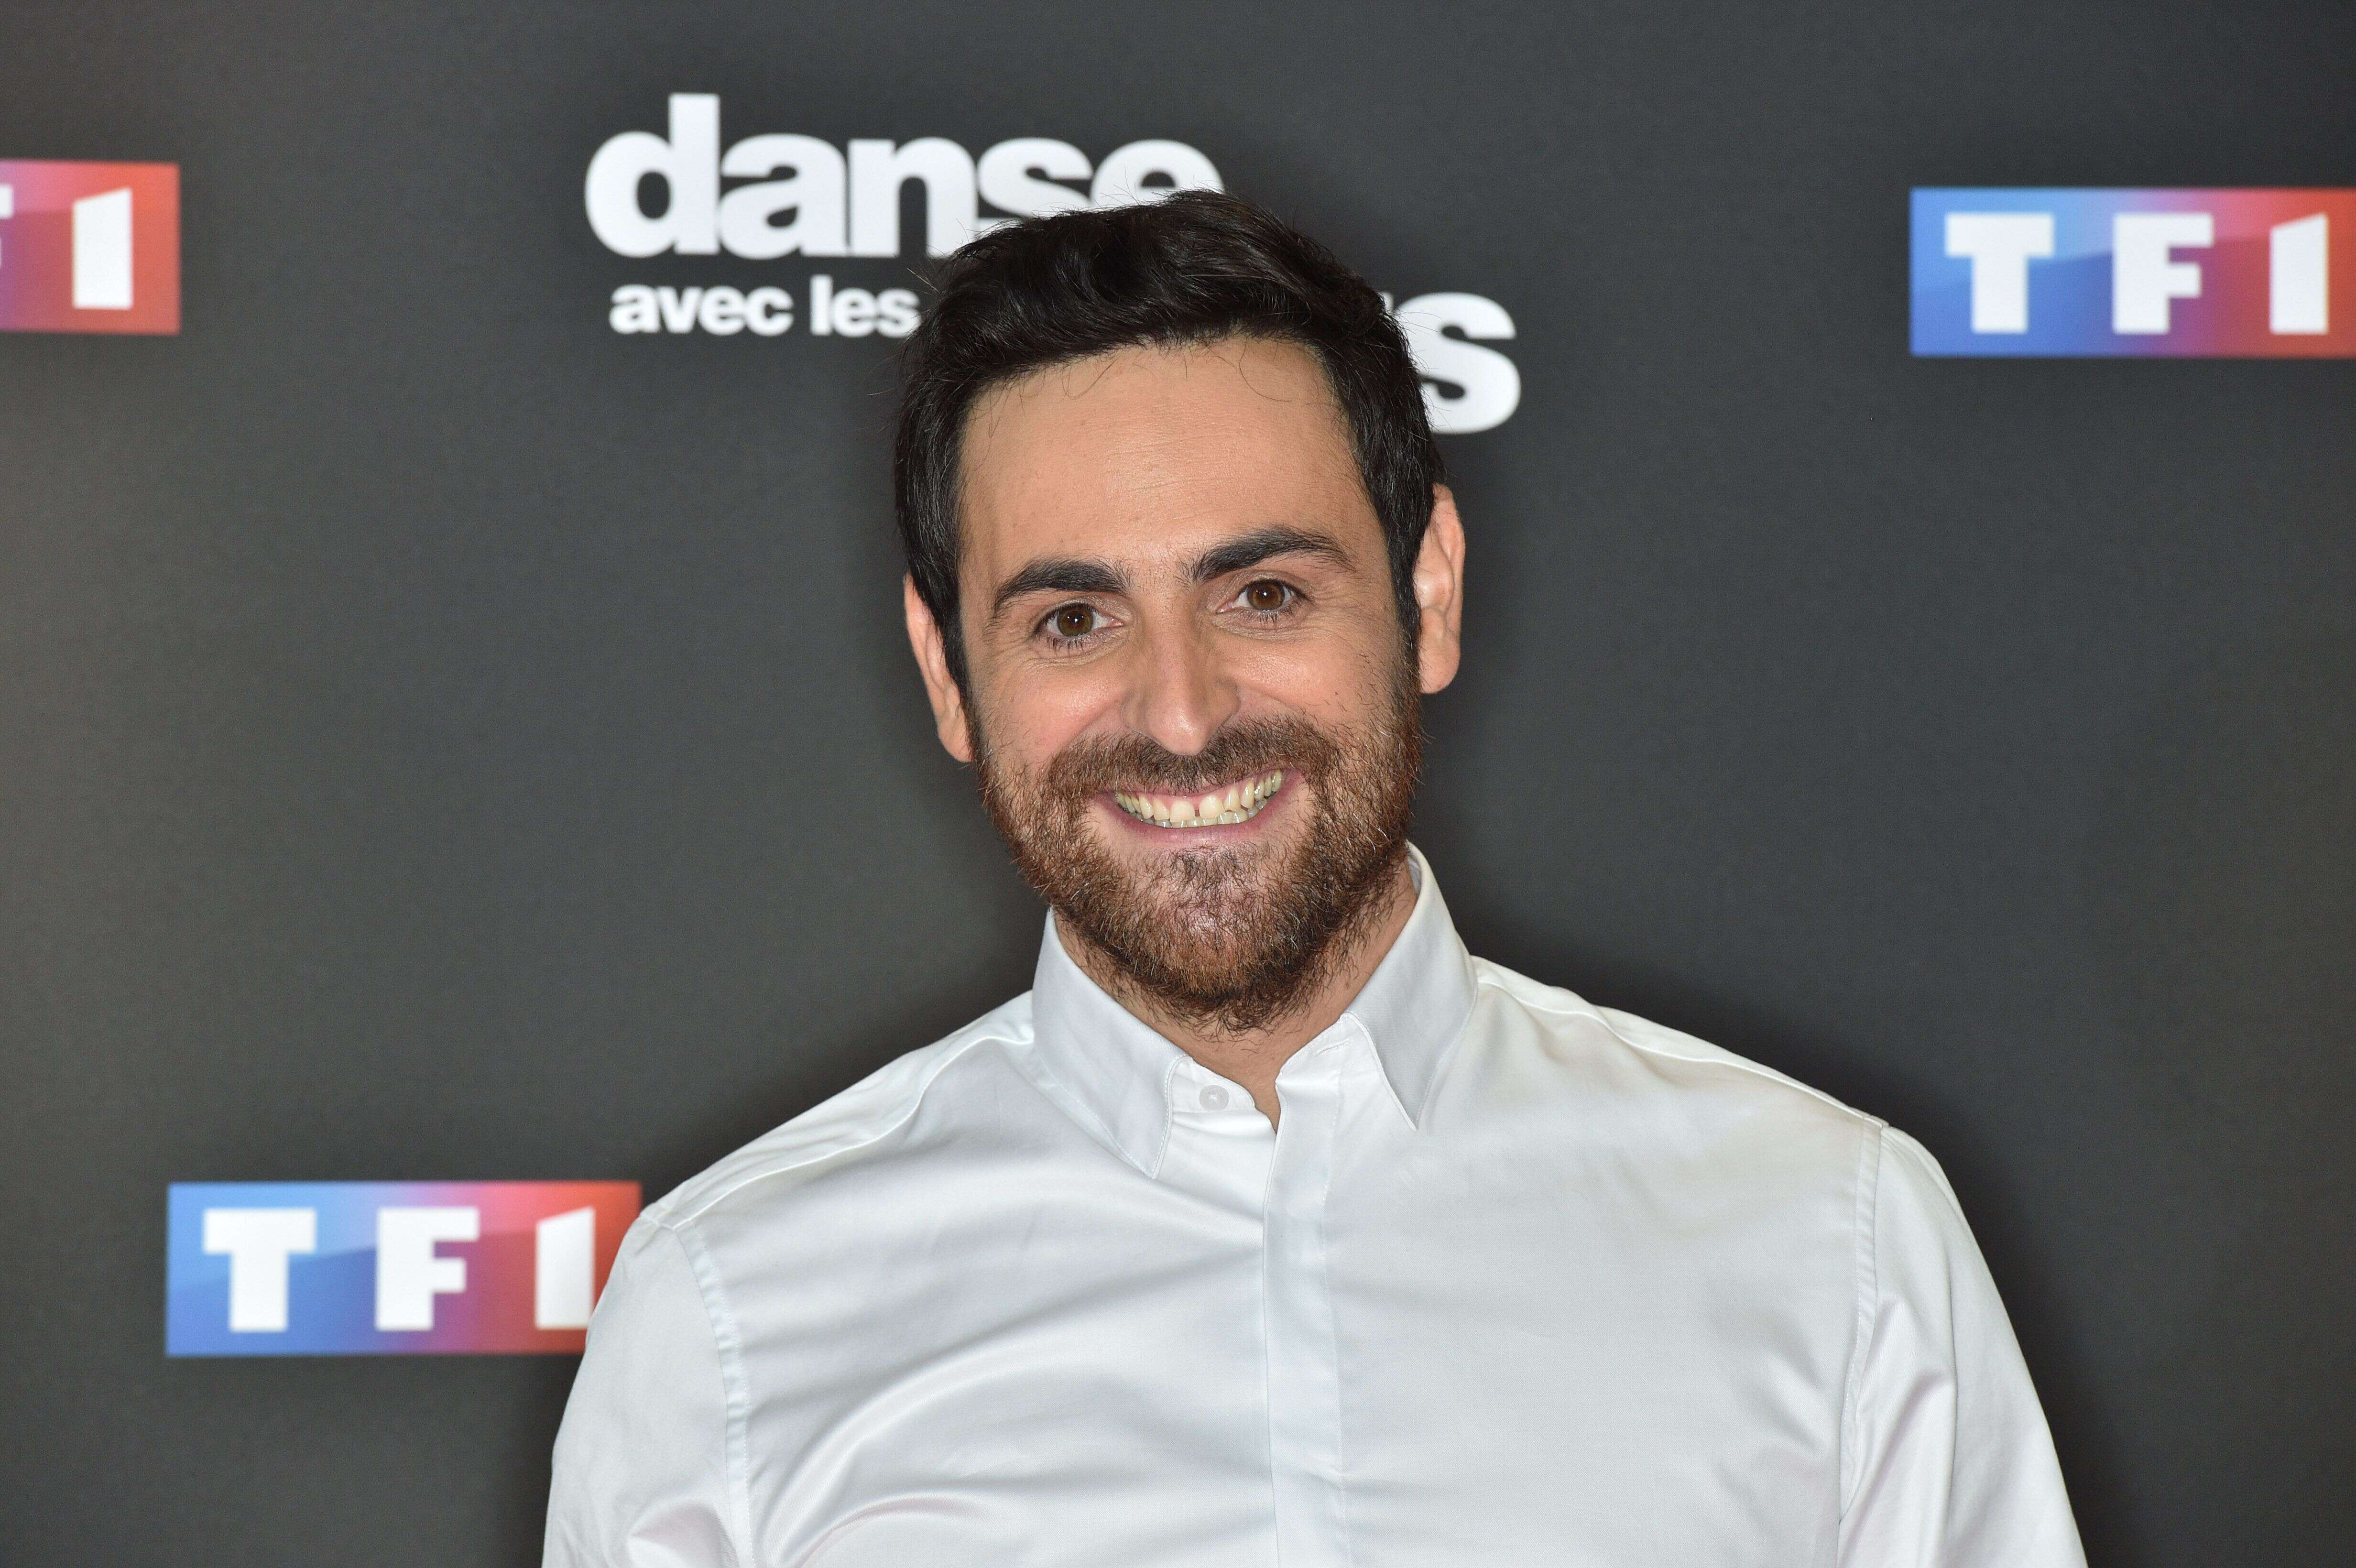 PARIS, FRANCE - SEPTEMBER 11:  Camille Combal  attends the 'Danse Avec Les Stars 2018' Photocall At TF1, on September 11, 2018 in Paris, France.  (Photo by Stephane Cardinale - Corbis/Corbis via Getty Images)